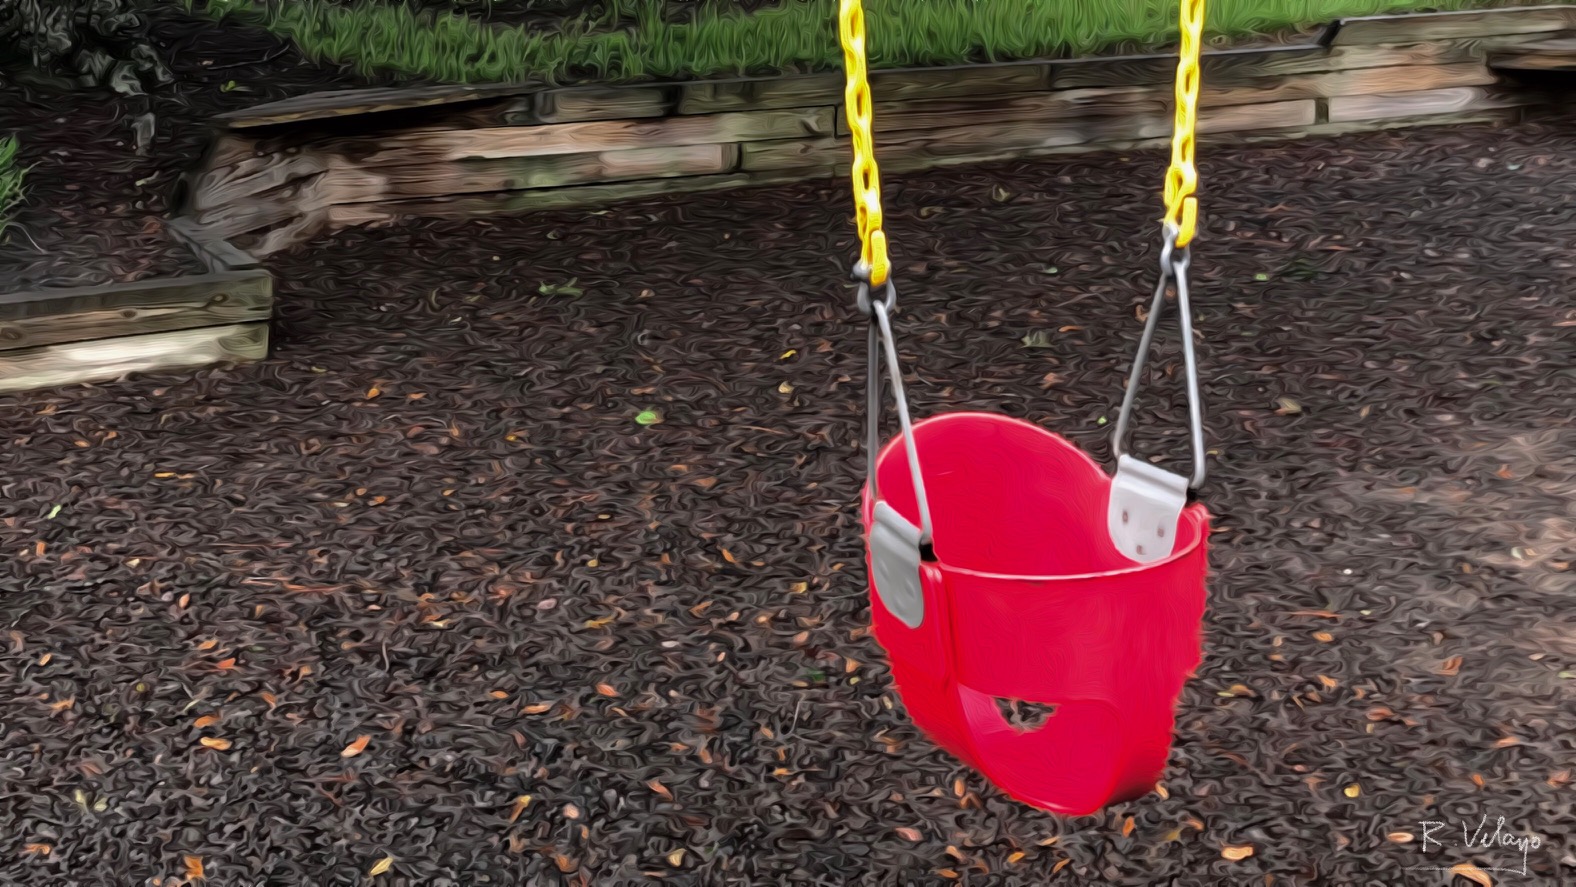 "A RED SWING AT BAHAMA BAY RESORT’S PLAYGROUND AREA" [Created: 6/09/2021]